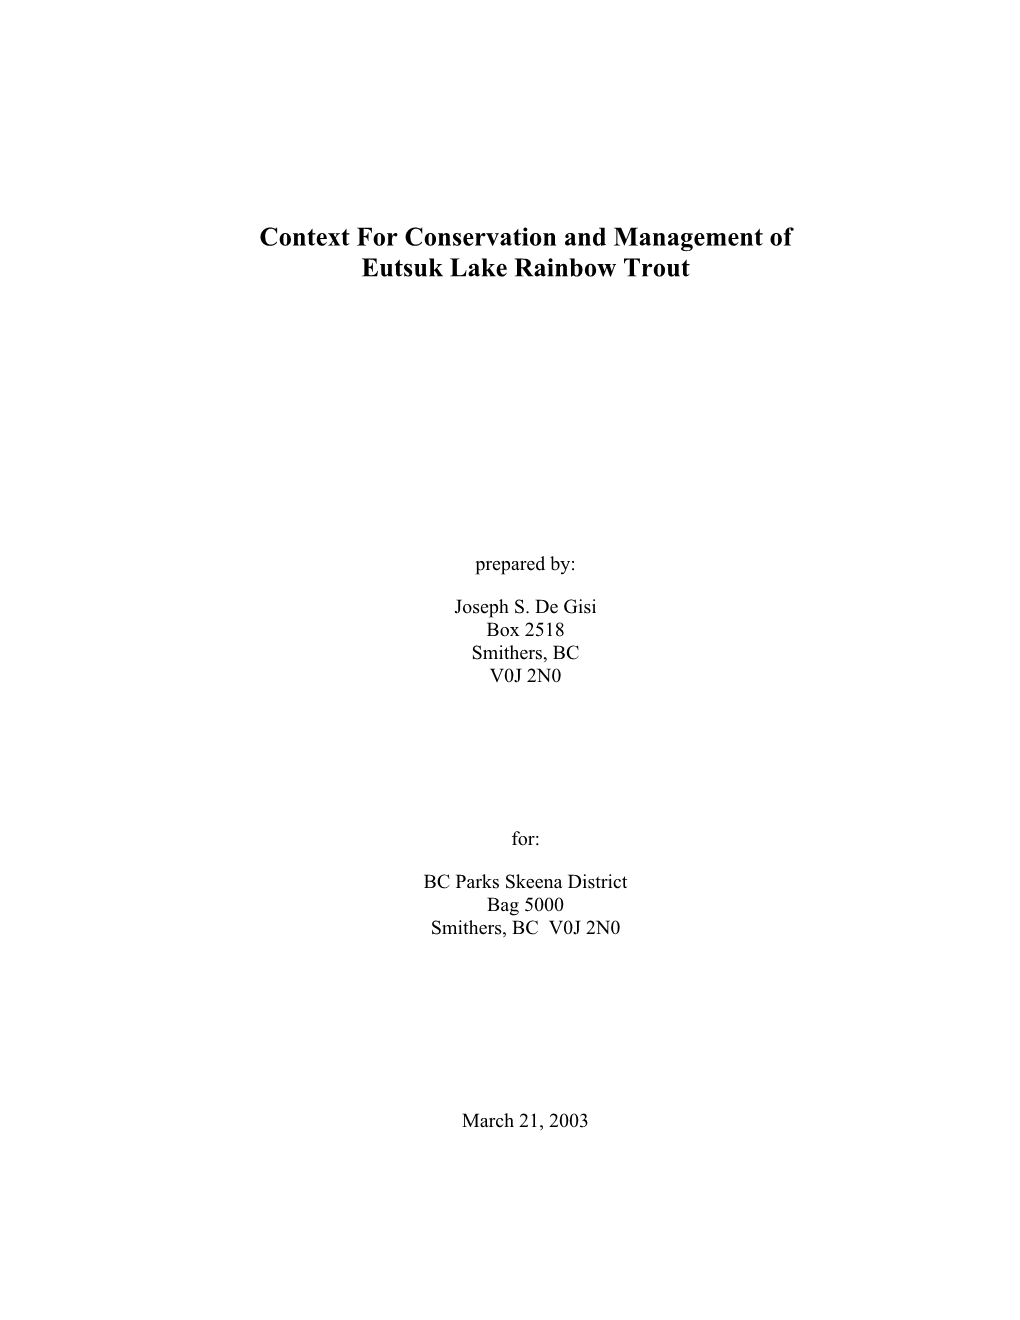 Context for Conservation and Management of Eutsuk Lake Rainbow Trout